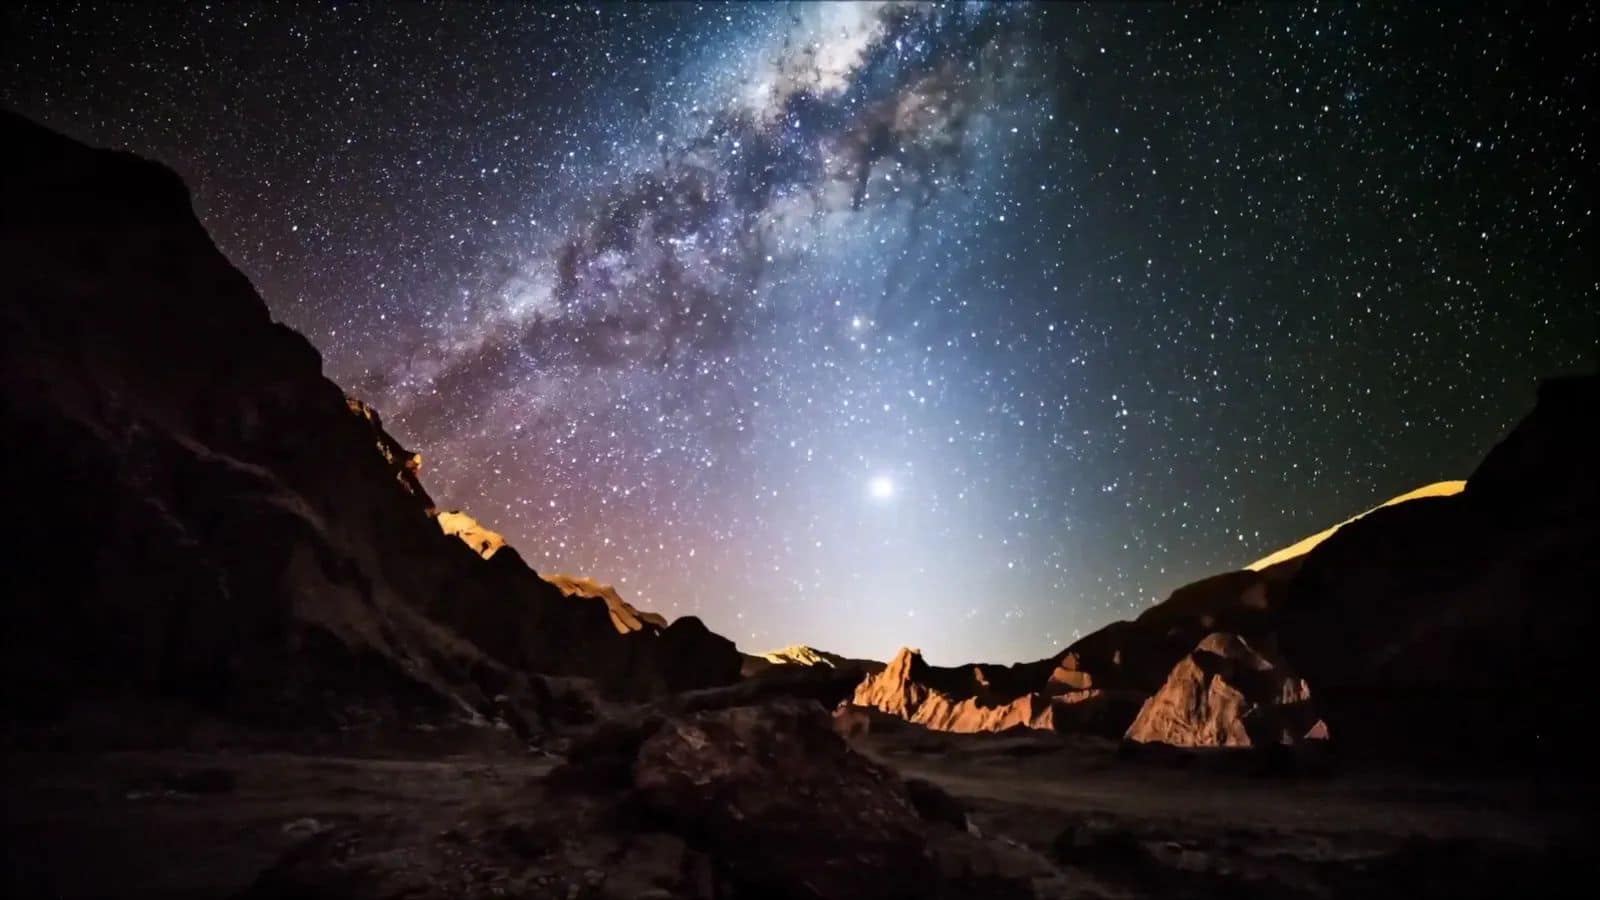 You can't miss this stargazing adventure in Atacama, Chile